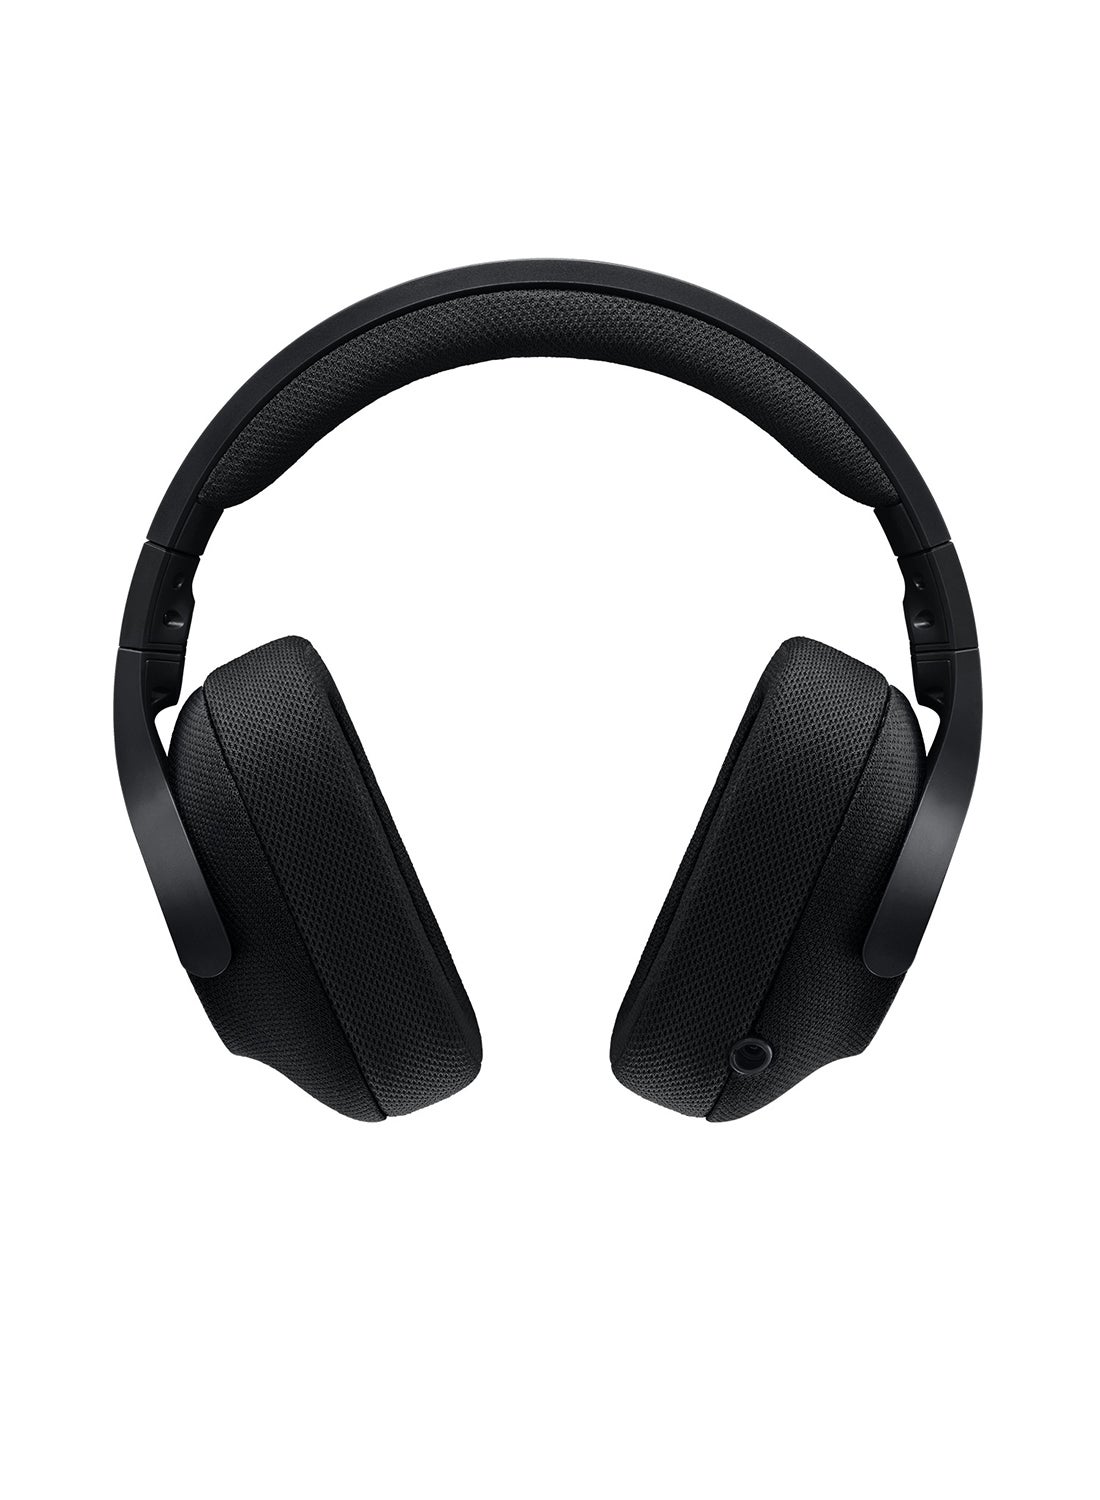 G433 Wired Gaming Headset, 7.1 Surround Sound, DTS Headphone:X, 40 mm Pro-G Audio Drivers, Lightweight, USB And 3.5 mm Jack,PC, Xbox One, Xbox Series X|S, PS5, PS4, Nintendo Switch 